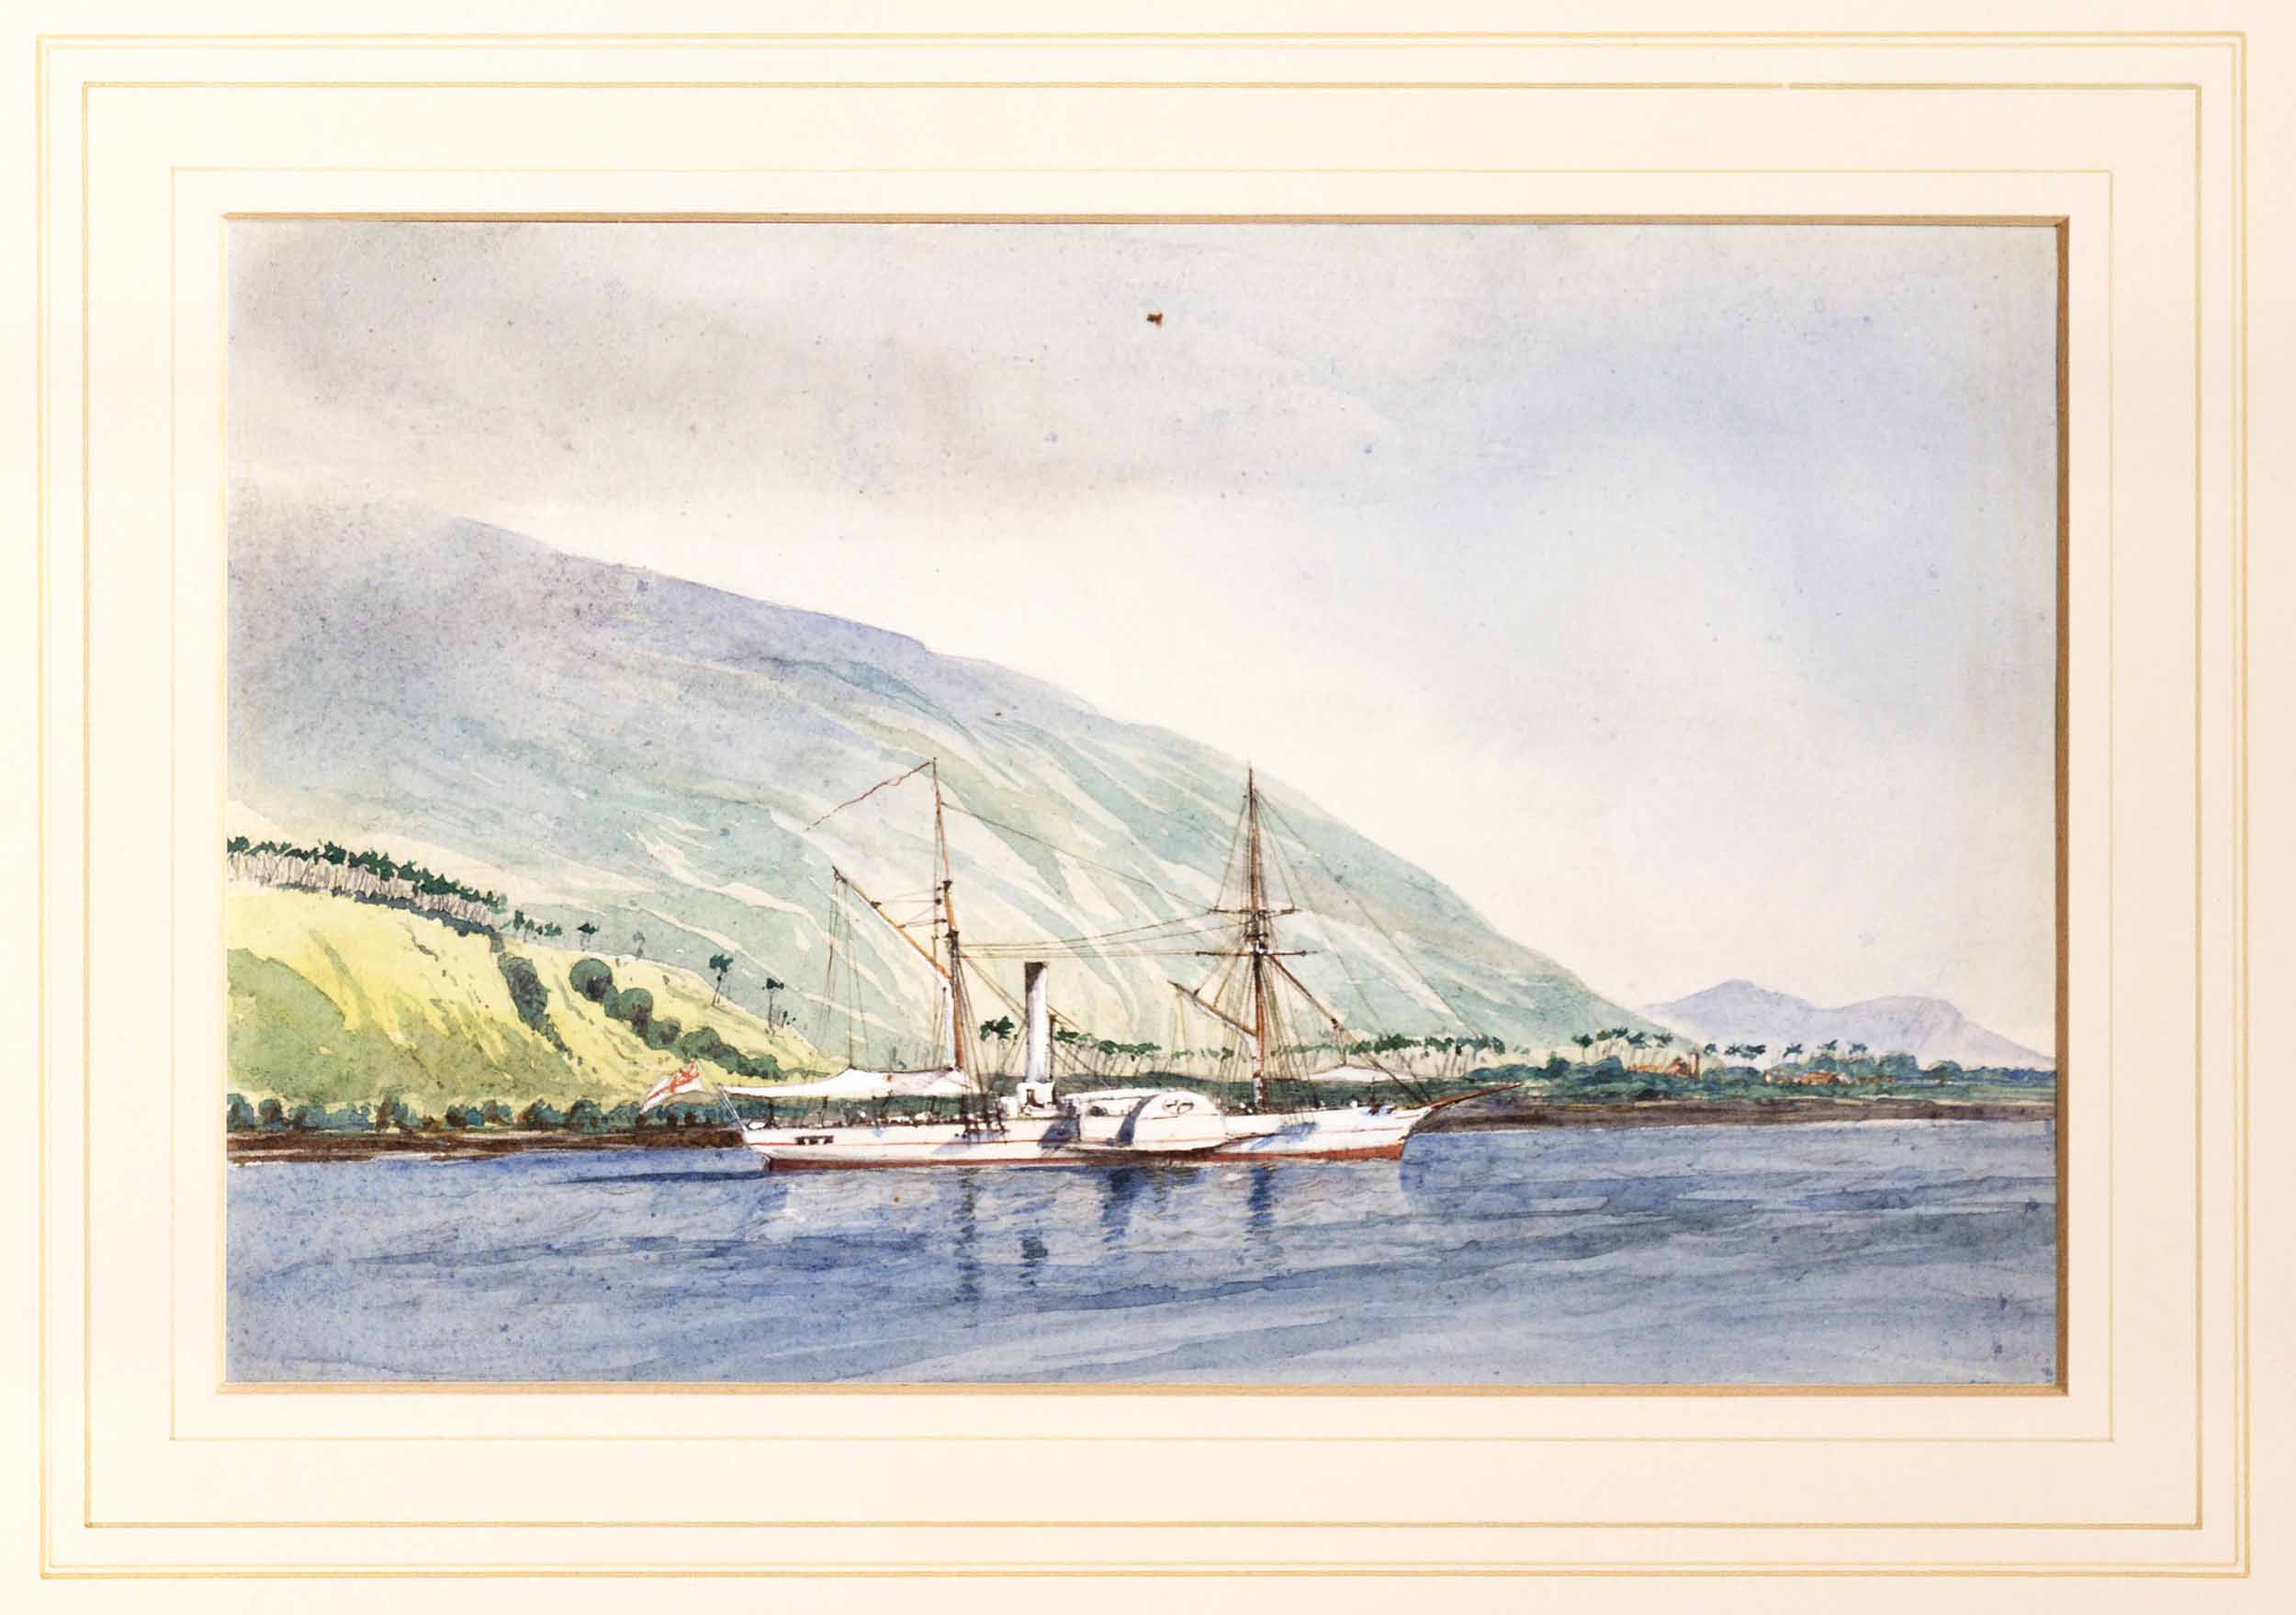 The Pioneer at Anchor in Pomony Harbor, Johanna. Livingstone and Kirk Were on Board and They Were about to Start for the Rovooma River to Ascertain if It Communicated with Lake Nyassa in Central Africa. 3 Sep[tember]. [18]62, by Thomas Mitchell. Courtesy of the Smithsonian Libraries, Washington, D.C.